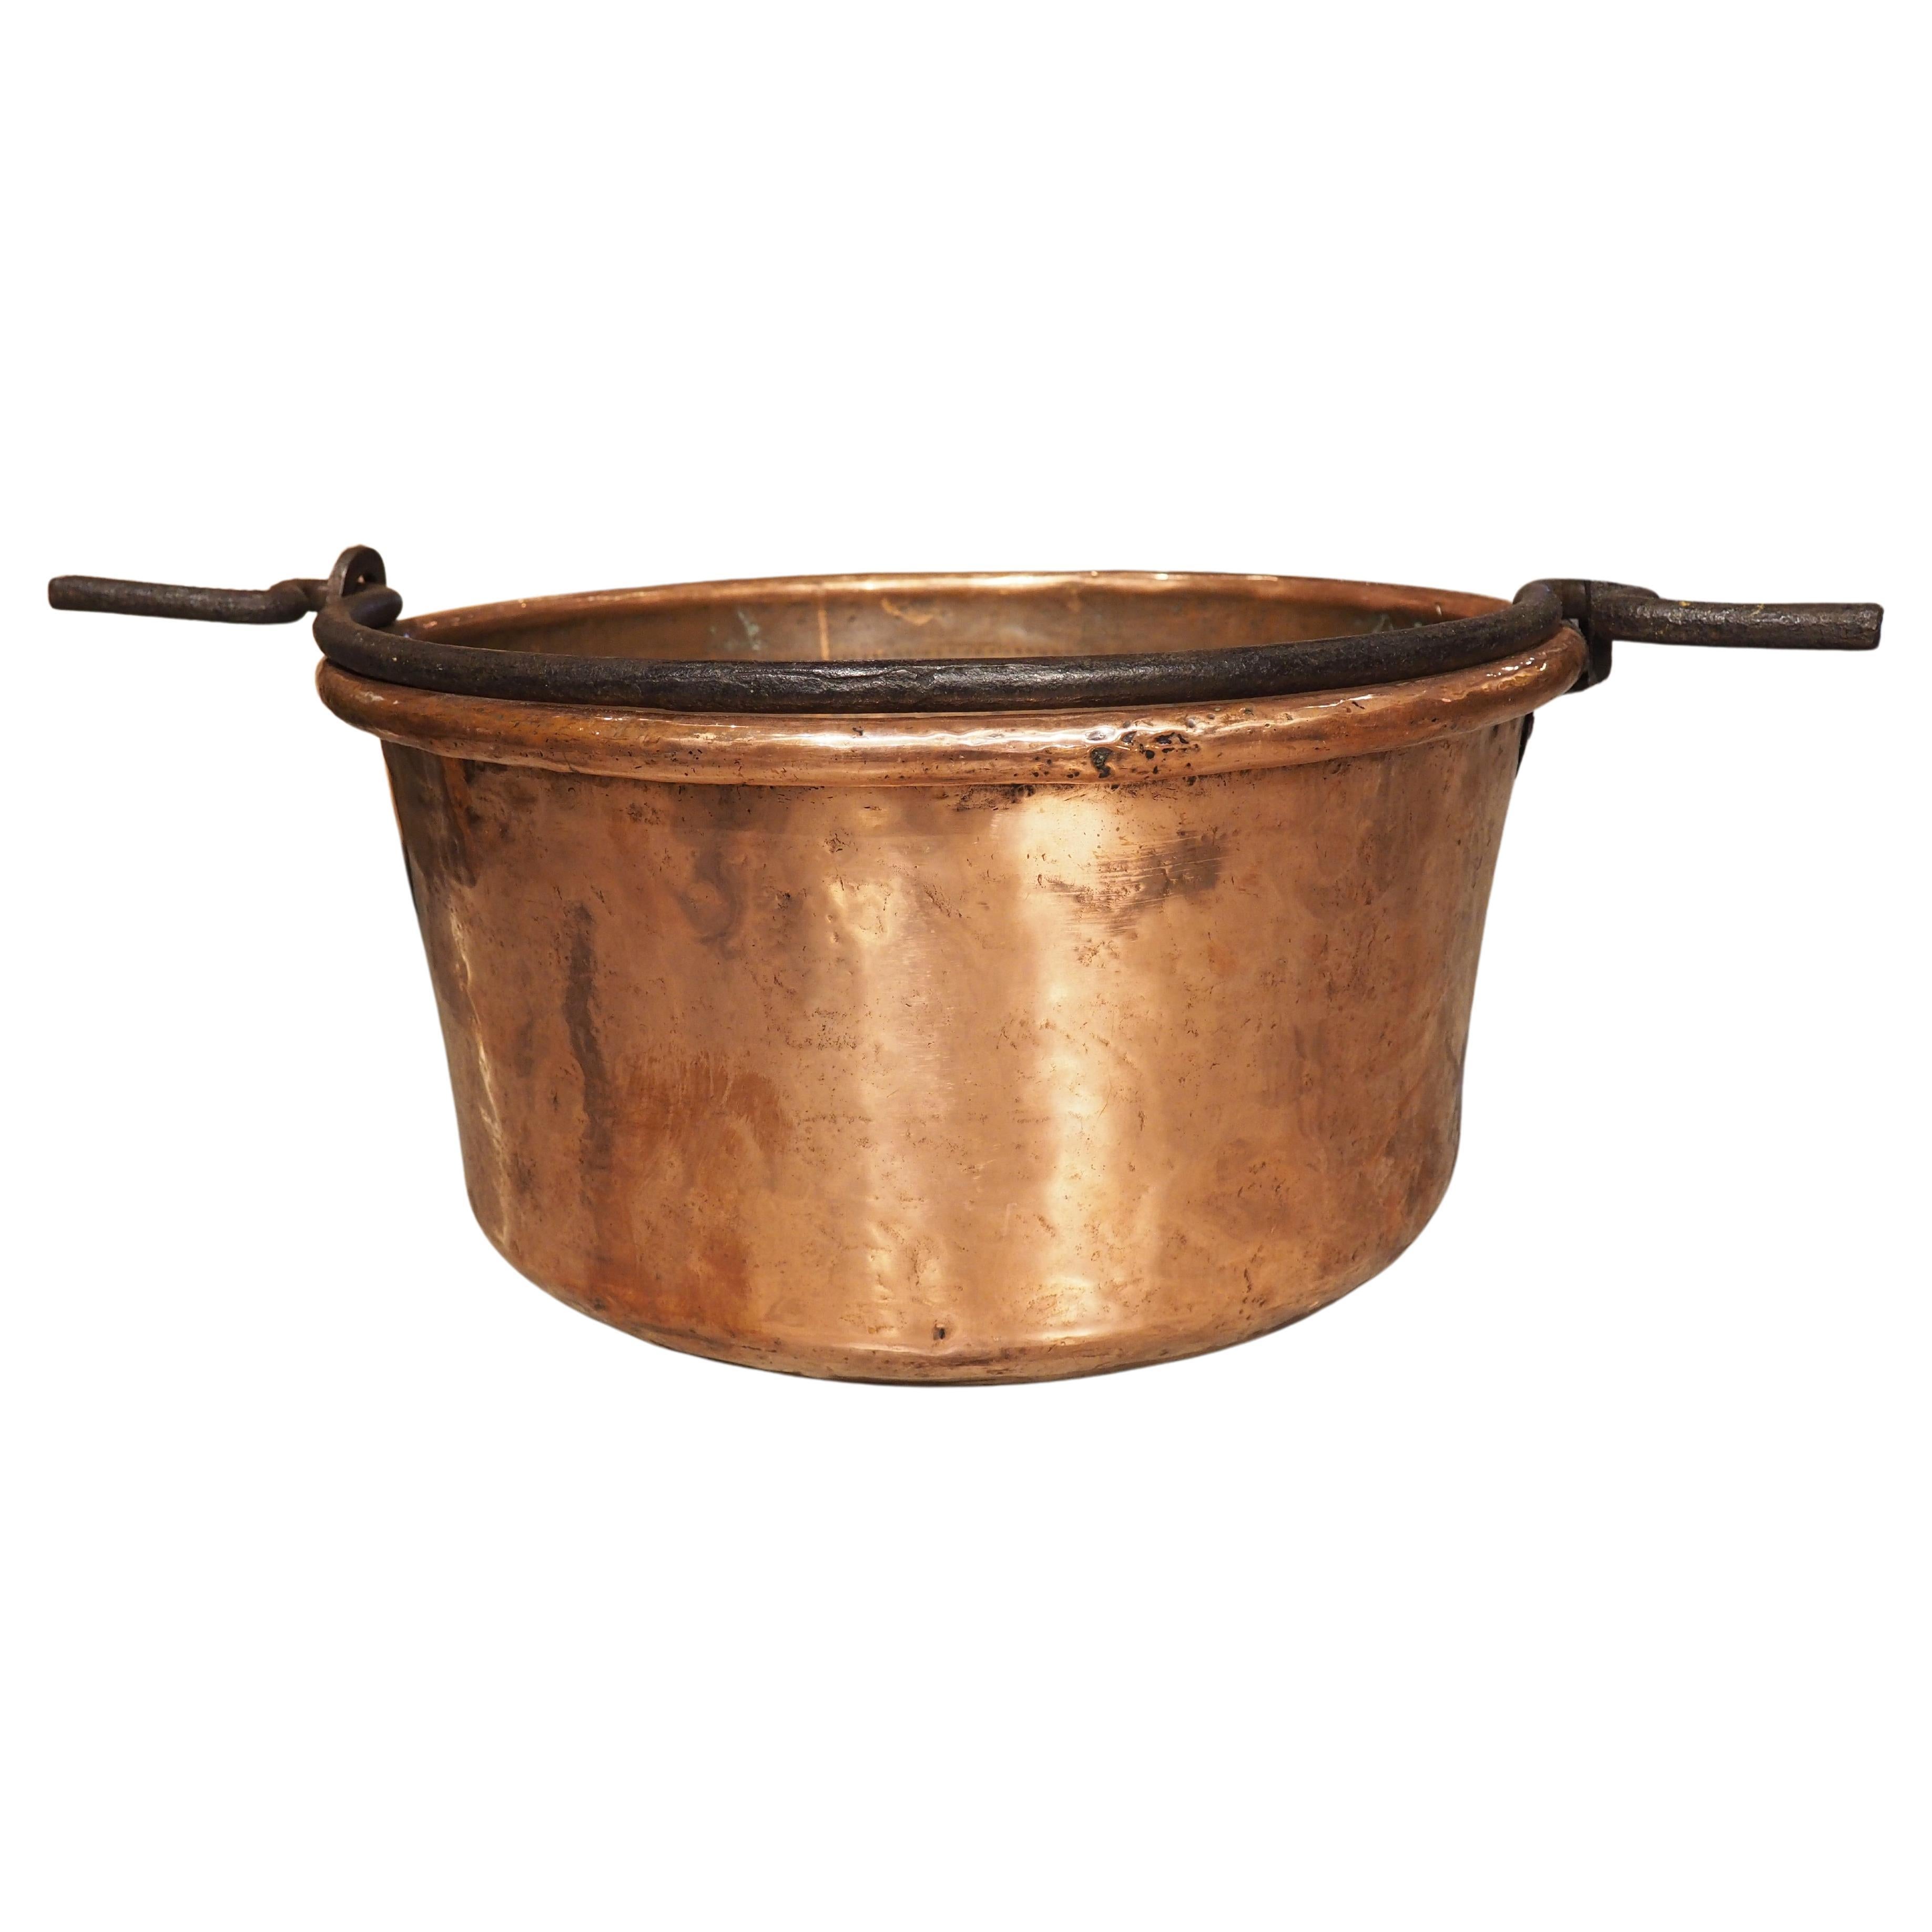 https://a.1stdibscdn.com/antique-polished-copper-chaudron-or-wine-cooler-wrought-iron-handle-circa-1850-for-sale/f_9063/f_327133221676064733712/f_32713322_1676064735047_bg_processed.jpg